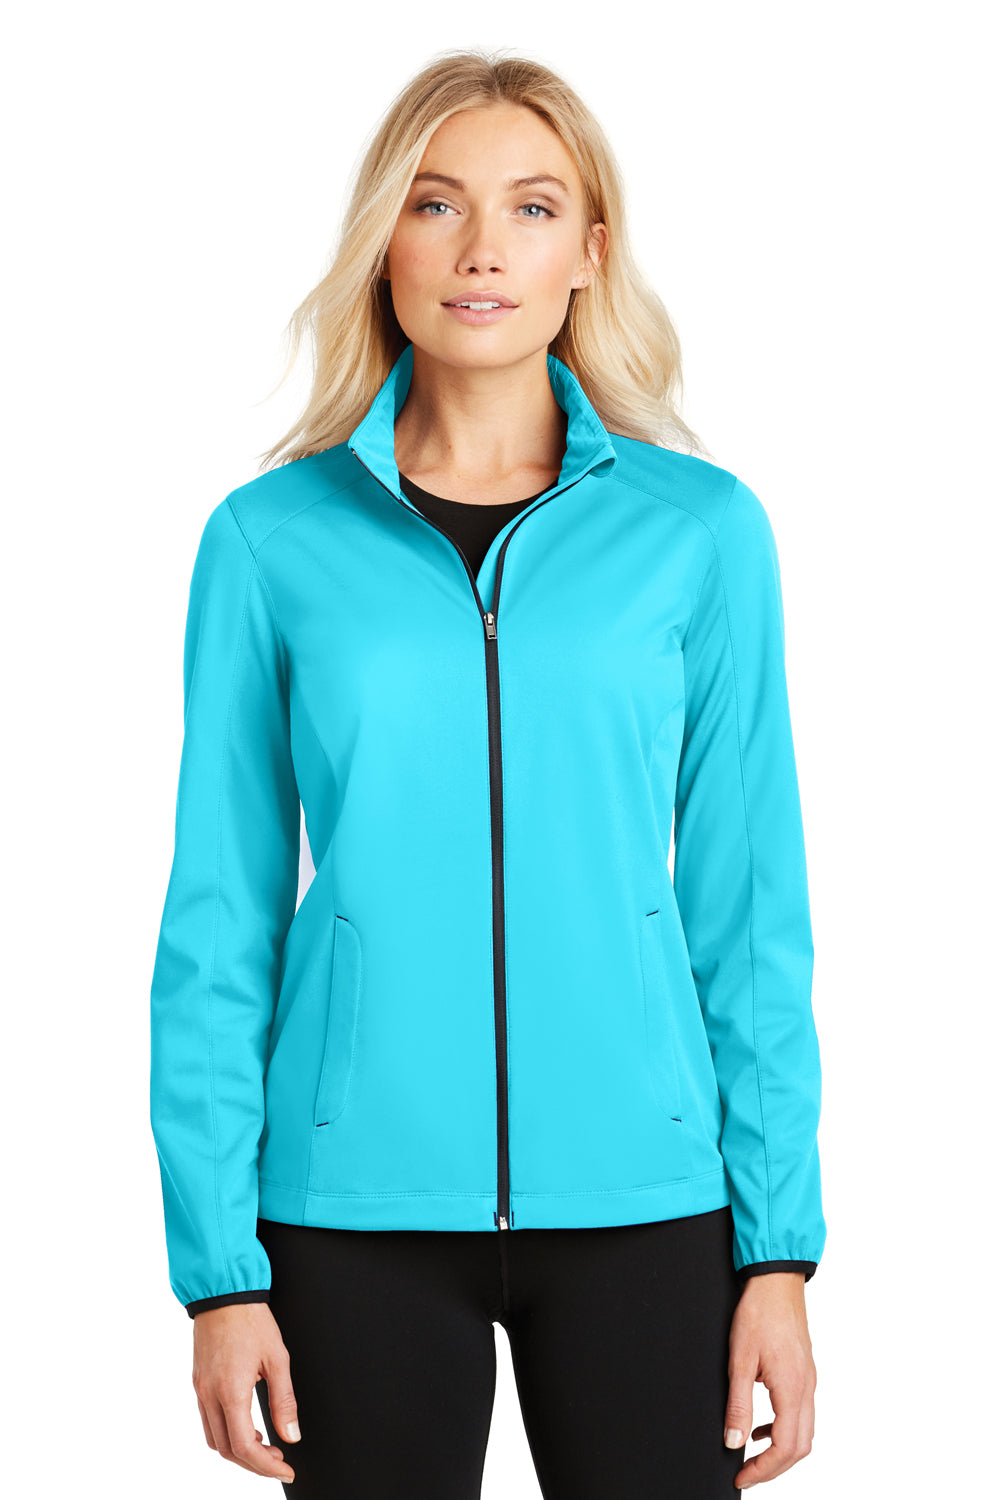 Port Authority L717 Womens Active Wind & Water Resistant Full Zip Jacket Cyan Blue Front